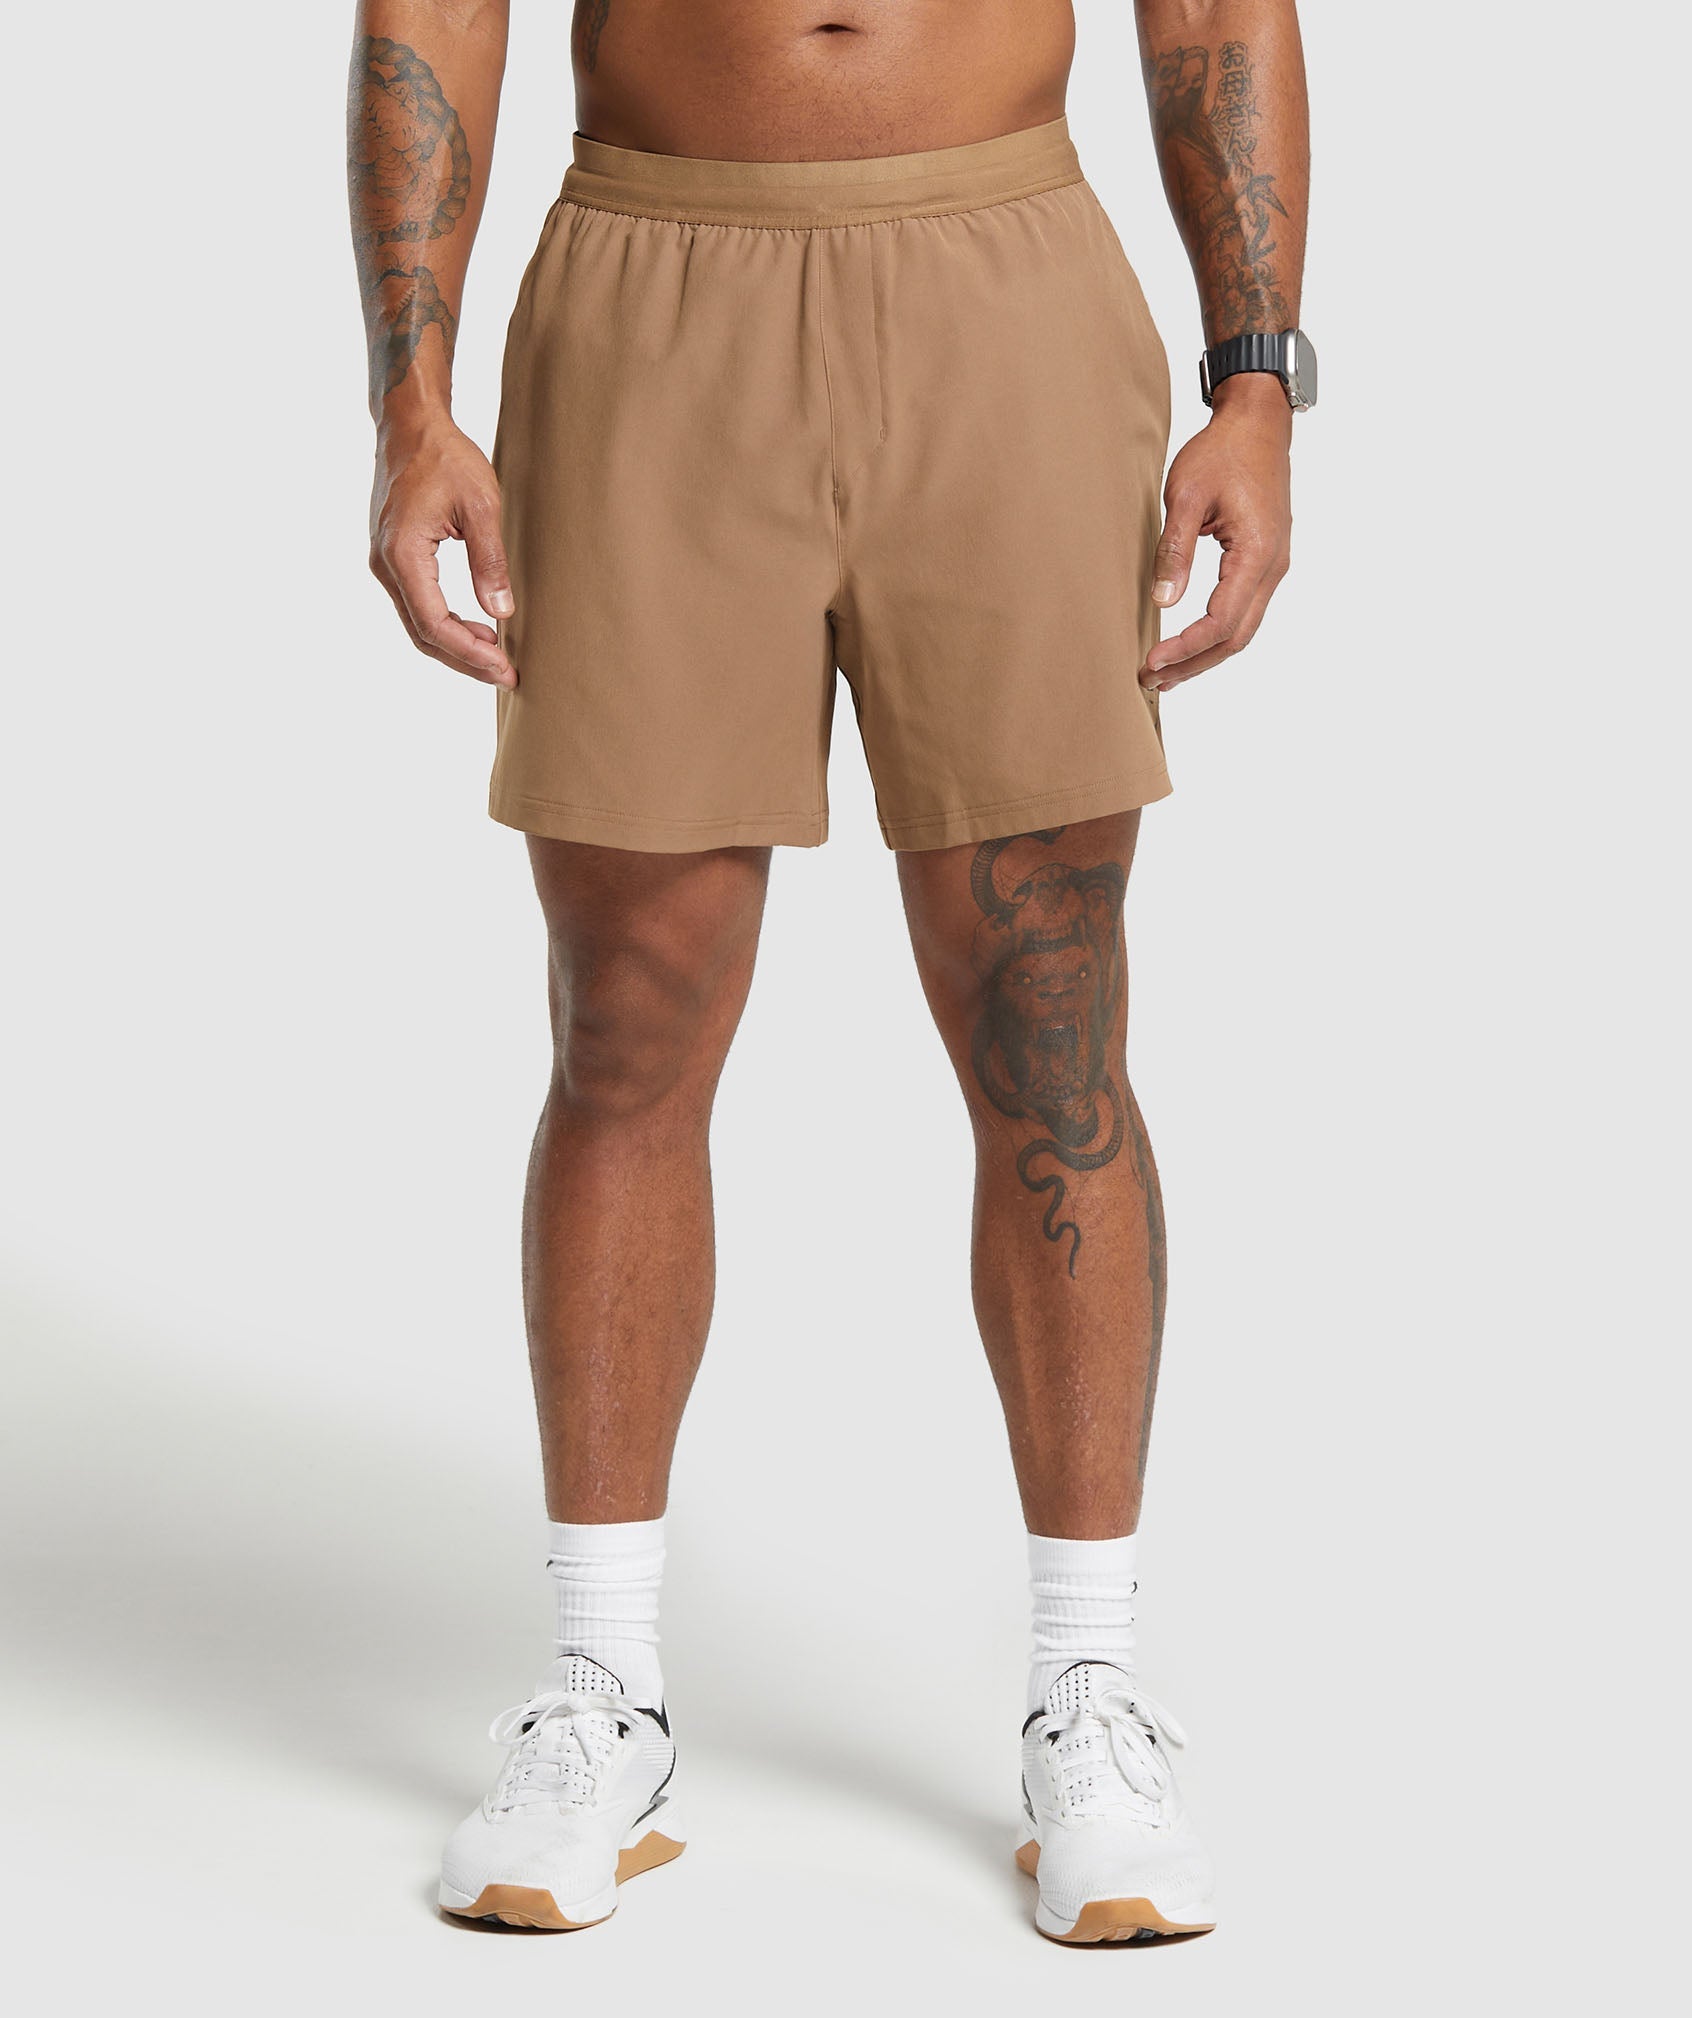 Land to Water 6" Shorts in Caramel Brown - view 1